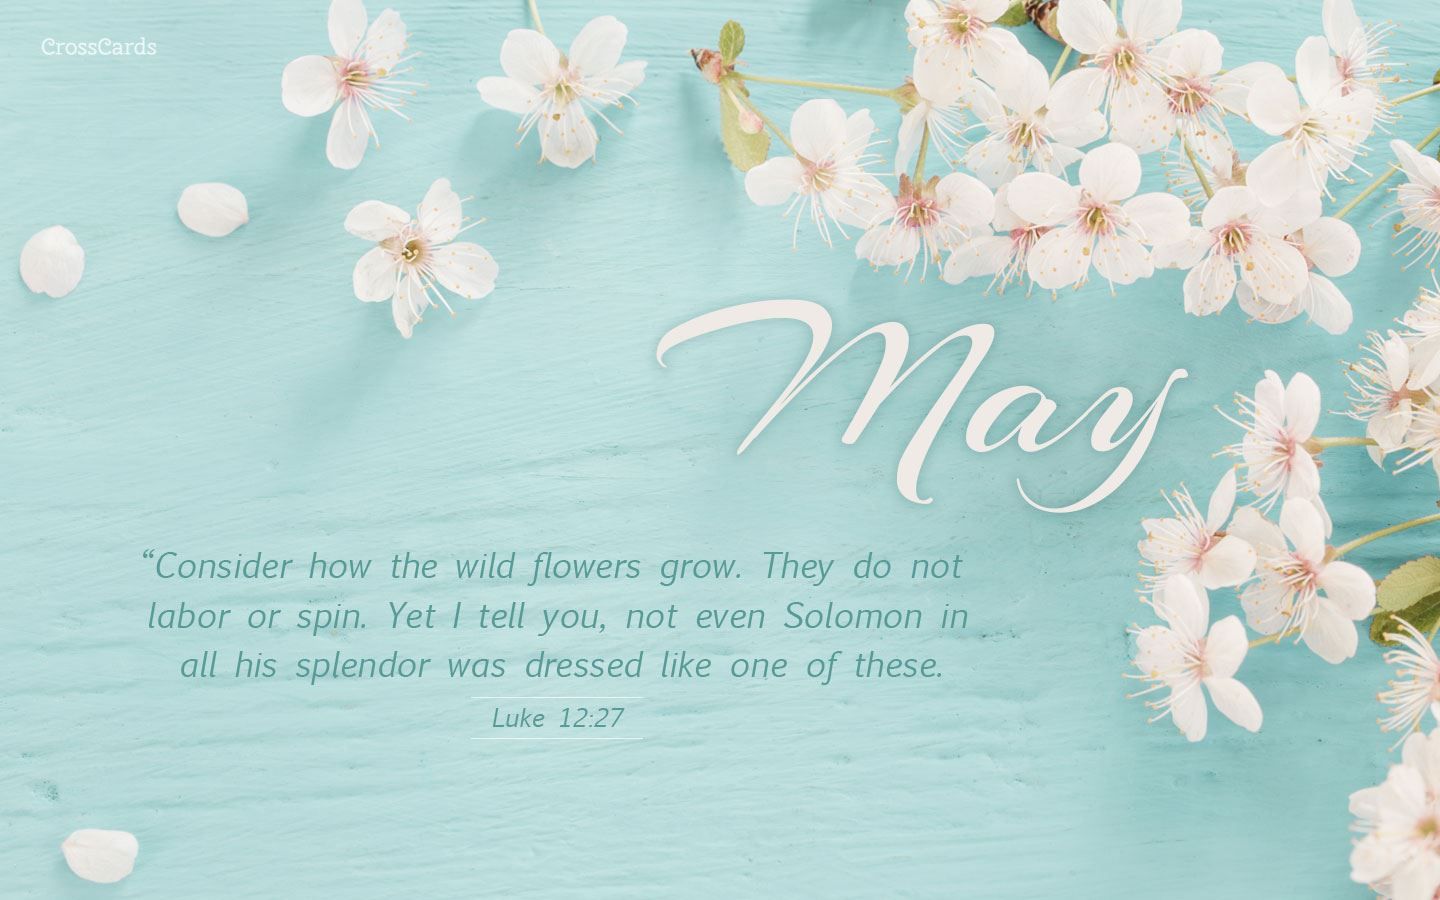 May How the Wildflowers Grow 12:27